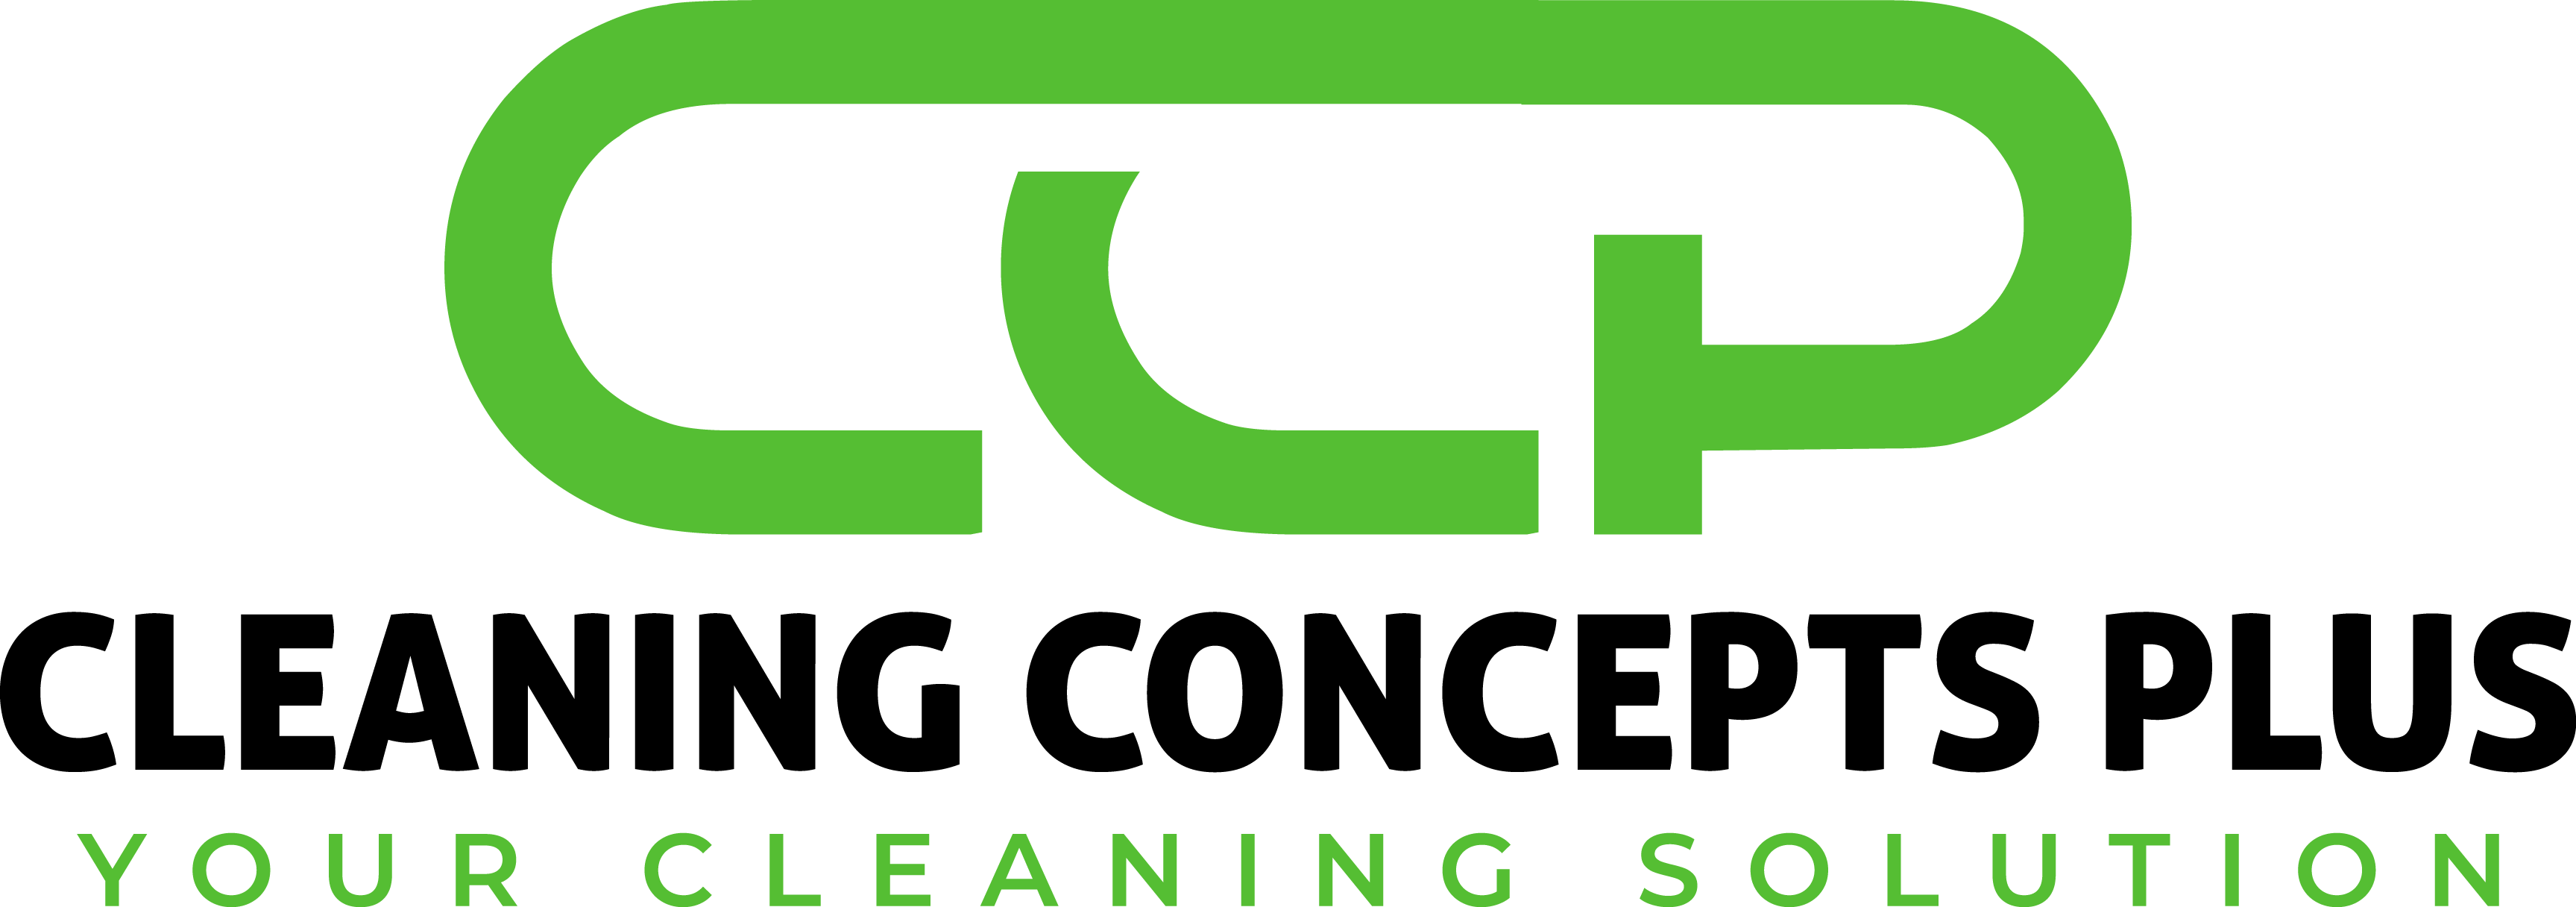 Cleaning Concepts Plus Offers Comprehensive Service And Maintenance Plans For All Types of Commercial Buildings